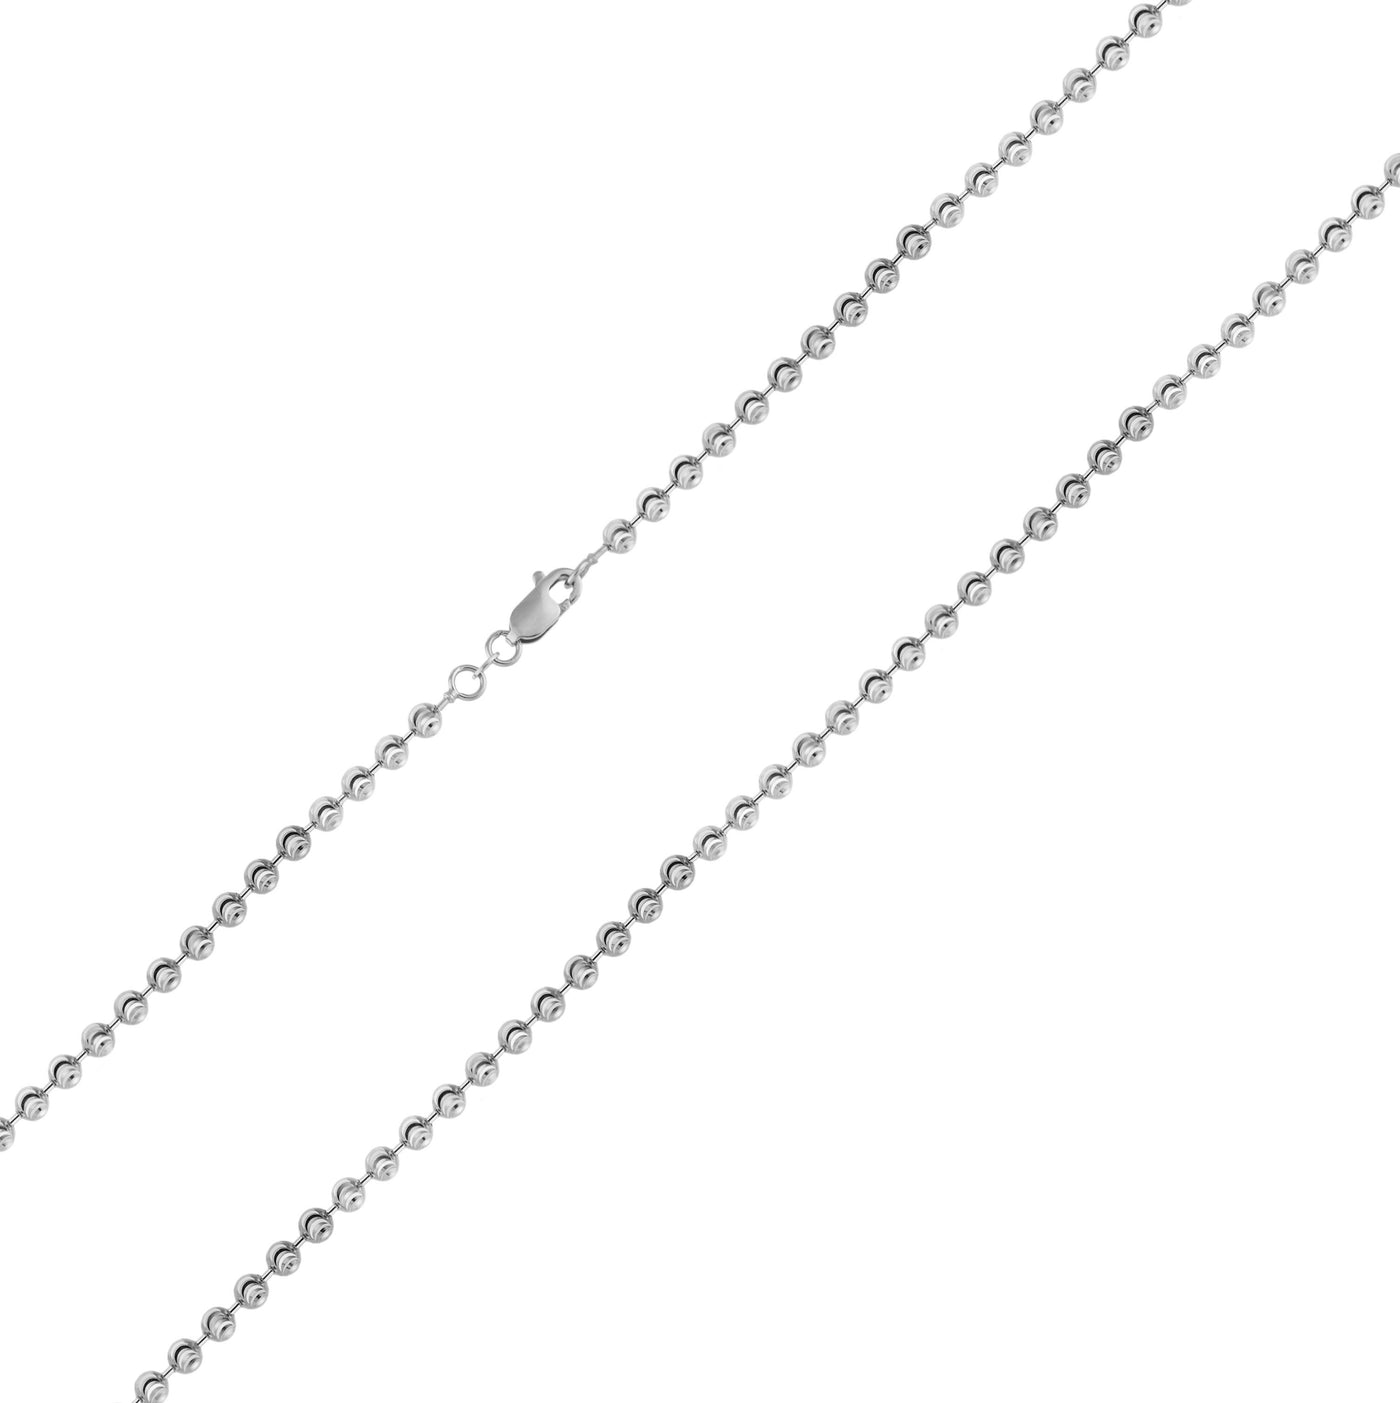 Bead Ball Moon Cut Link Chain Necklace 14K White Gold